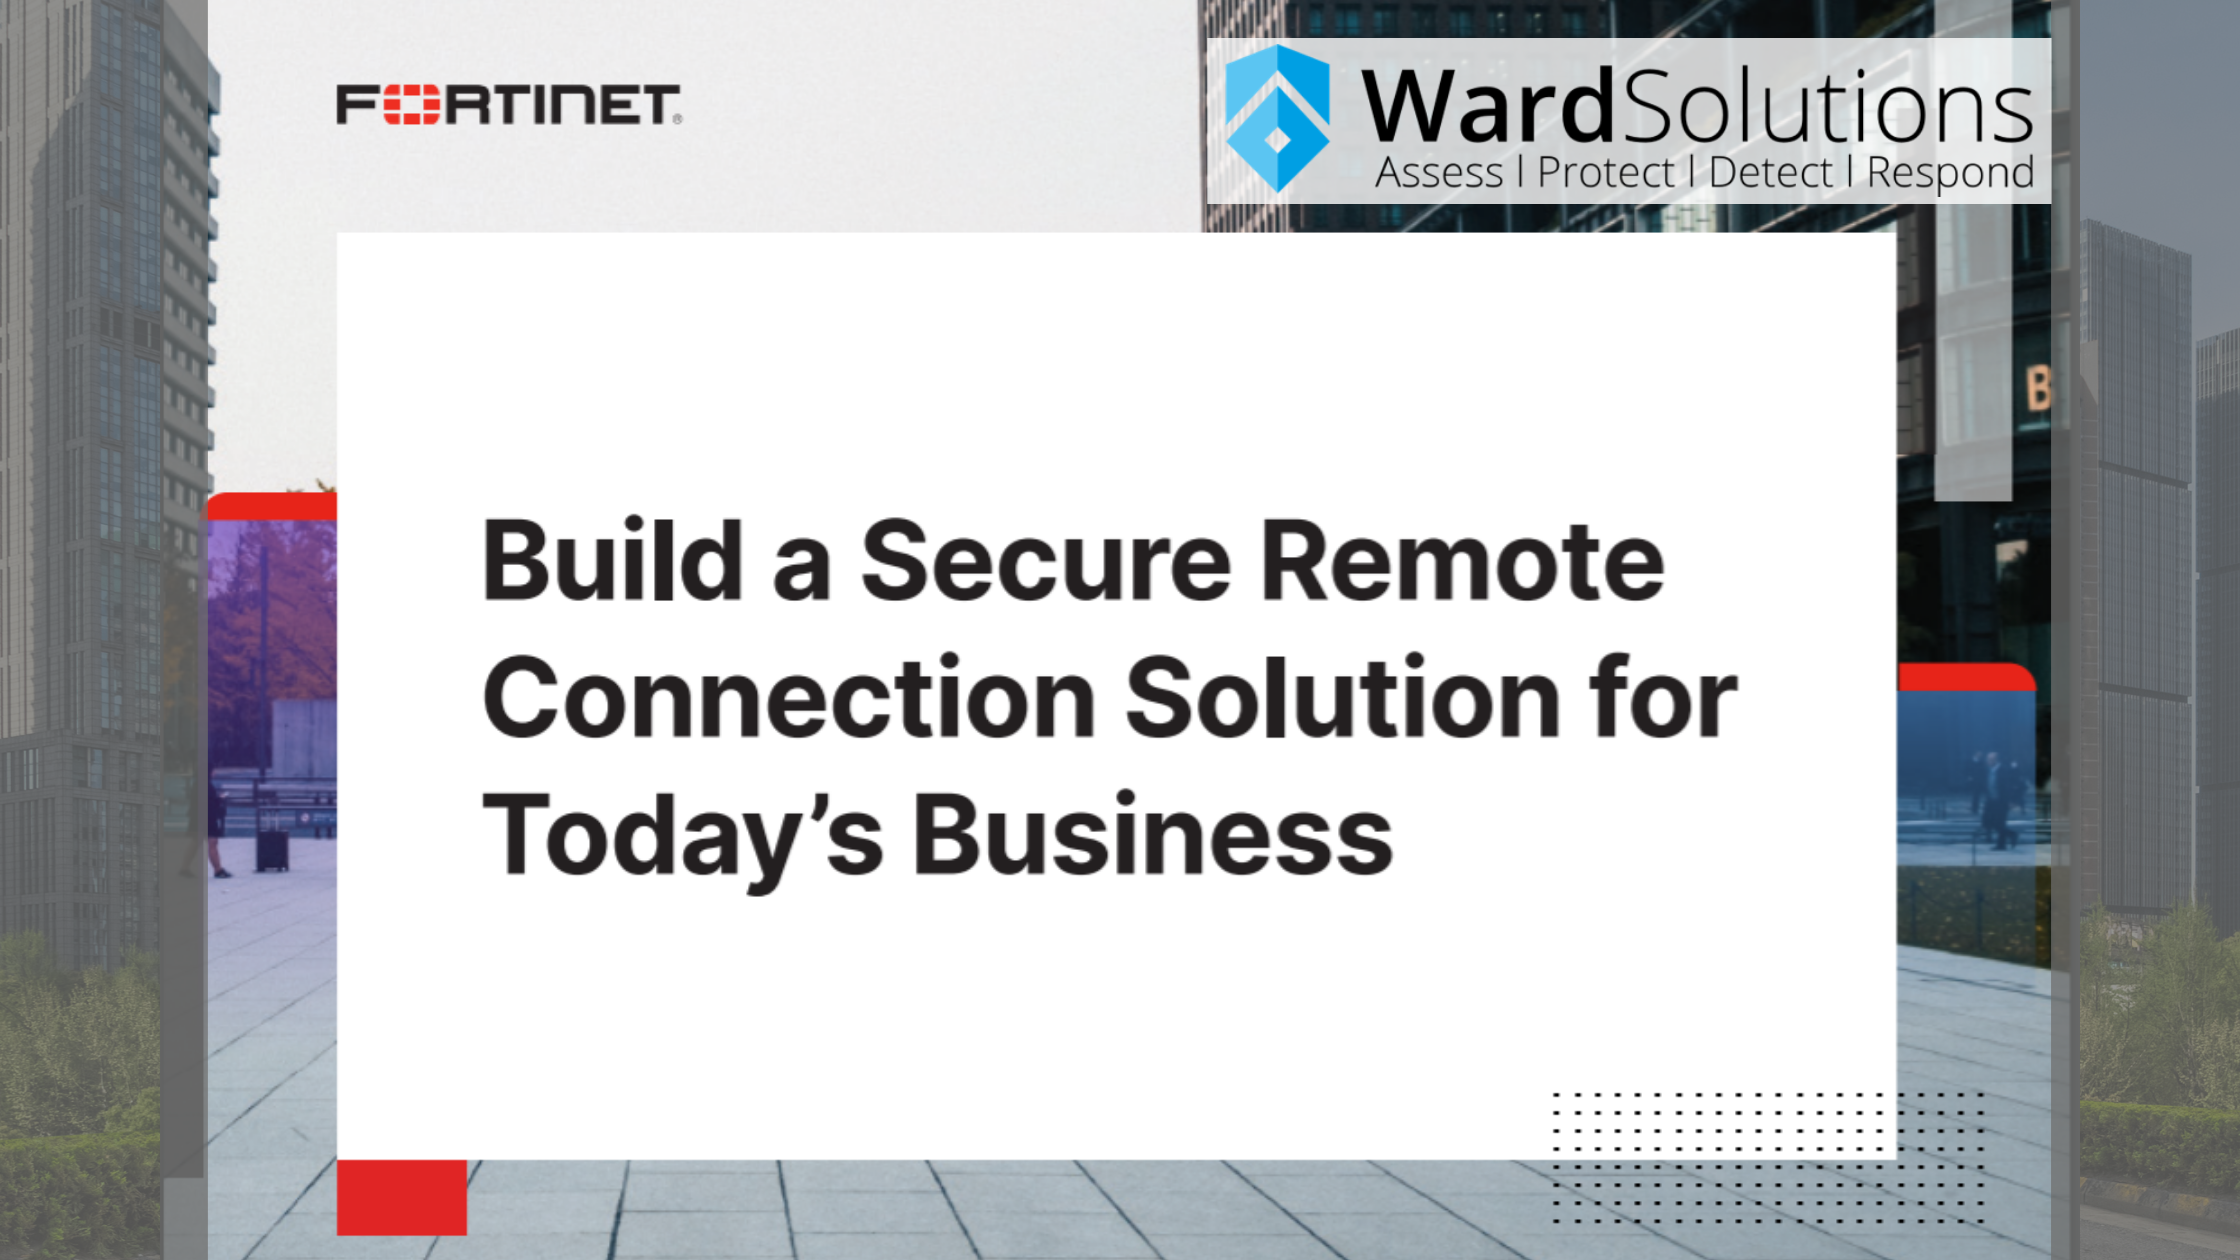 Build a Secure Remote Connection Solution for Today’s Business